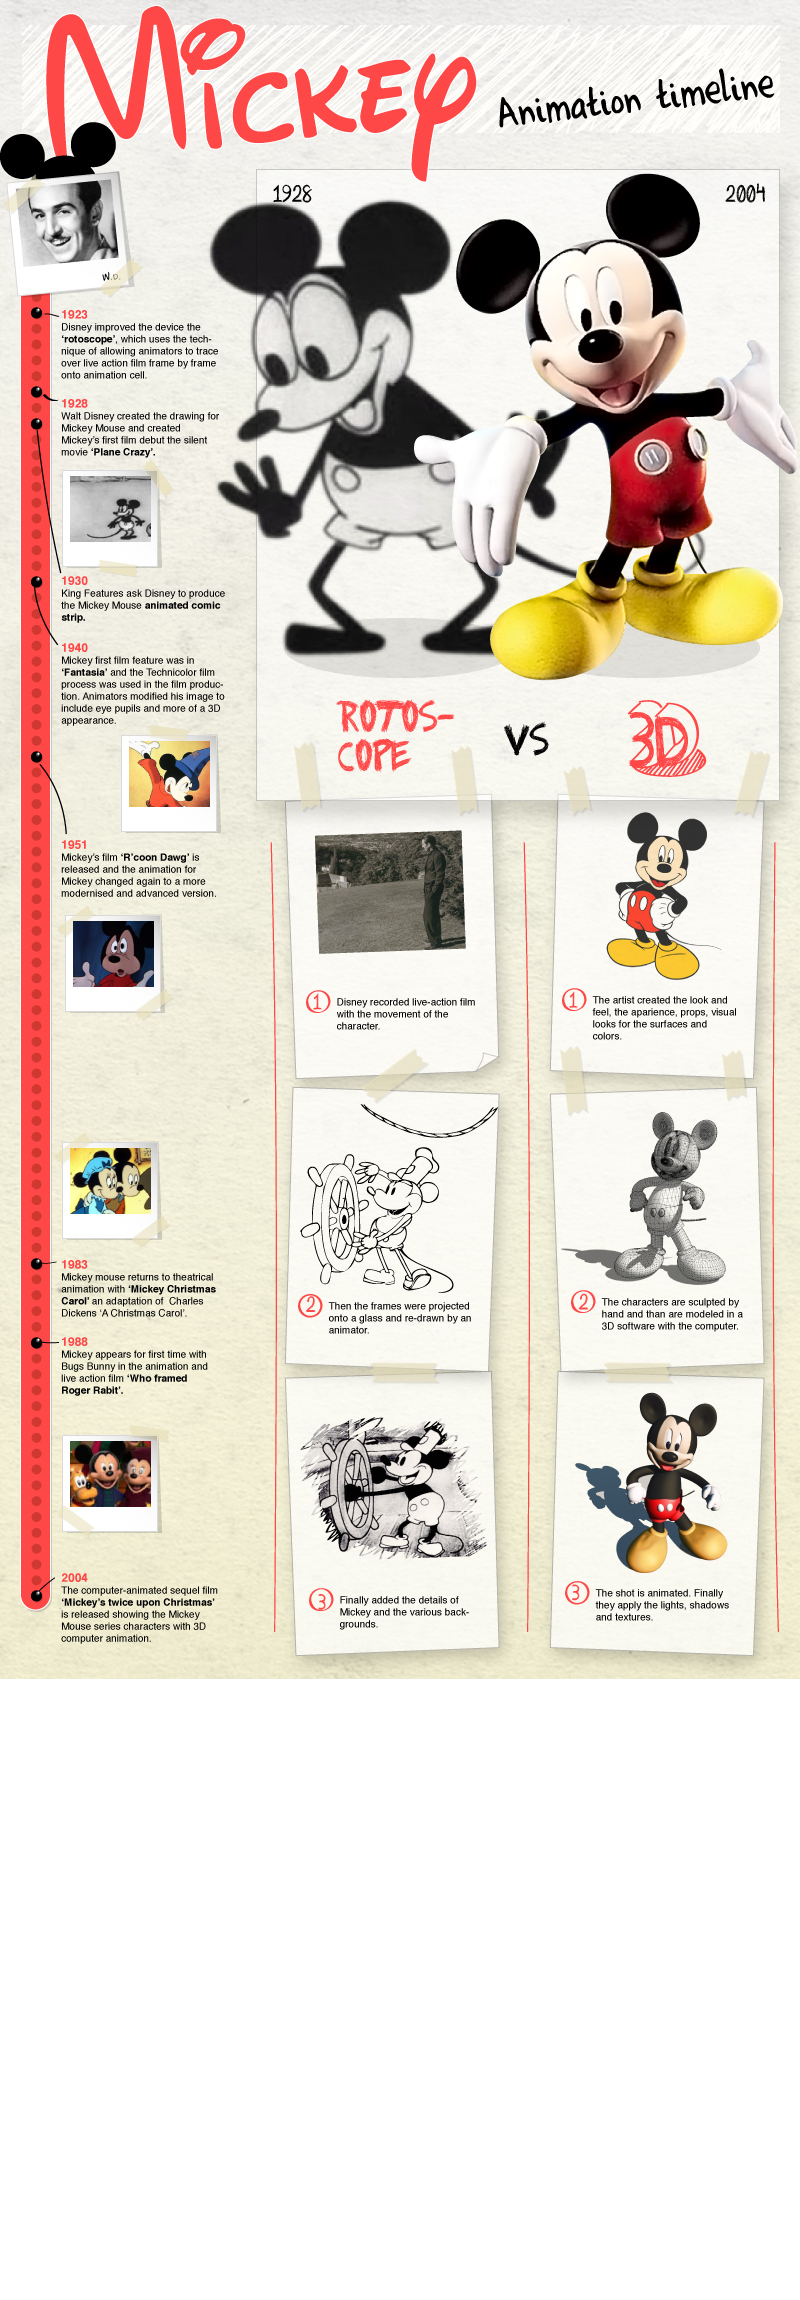 evolution of mickey mouse